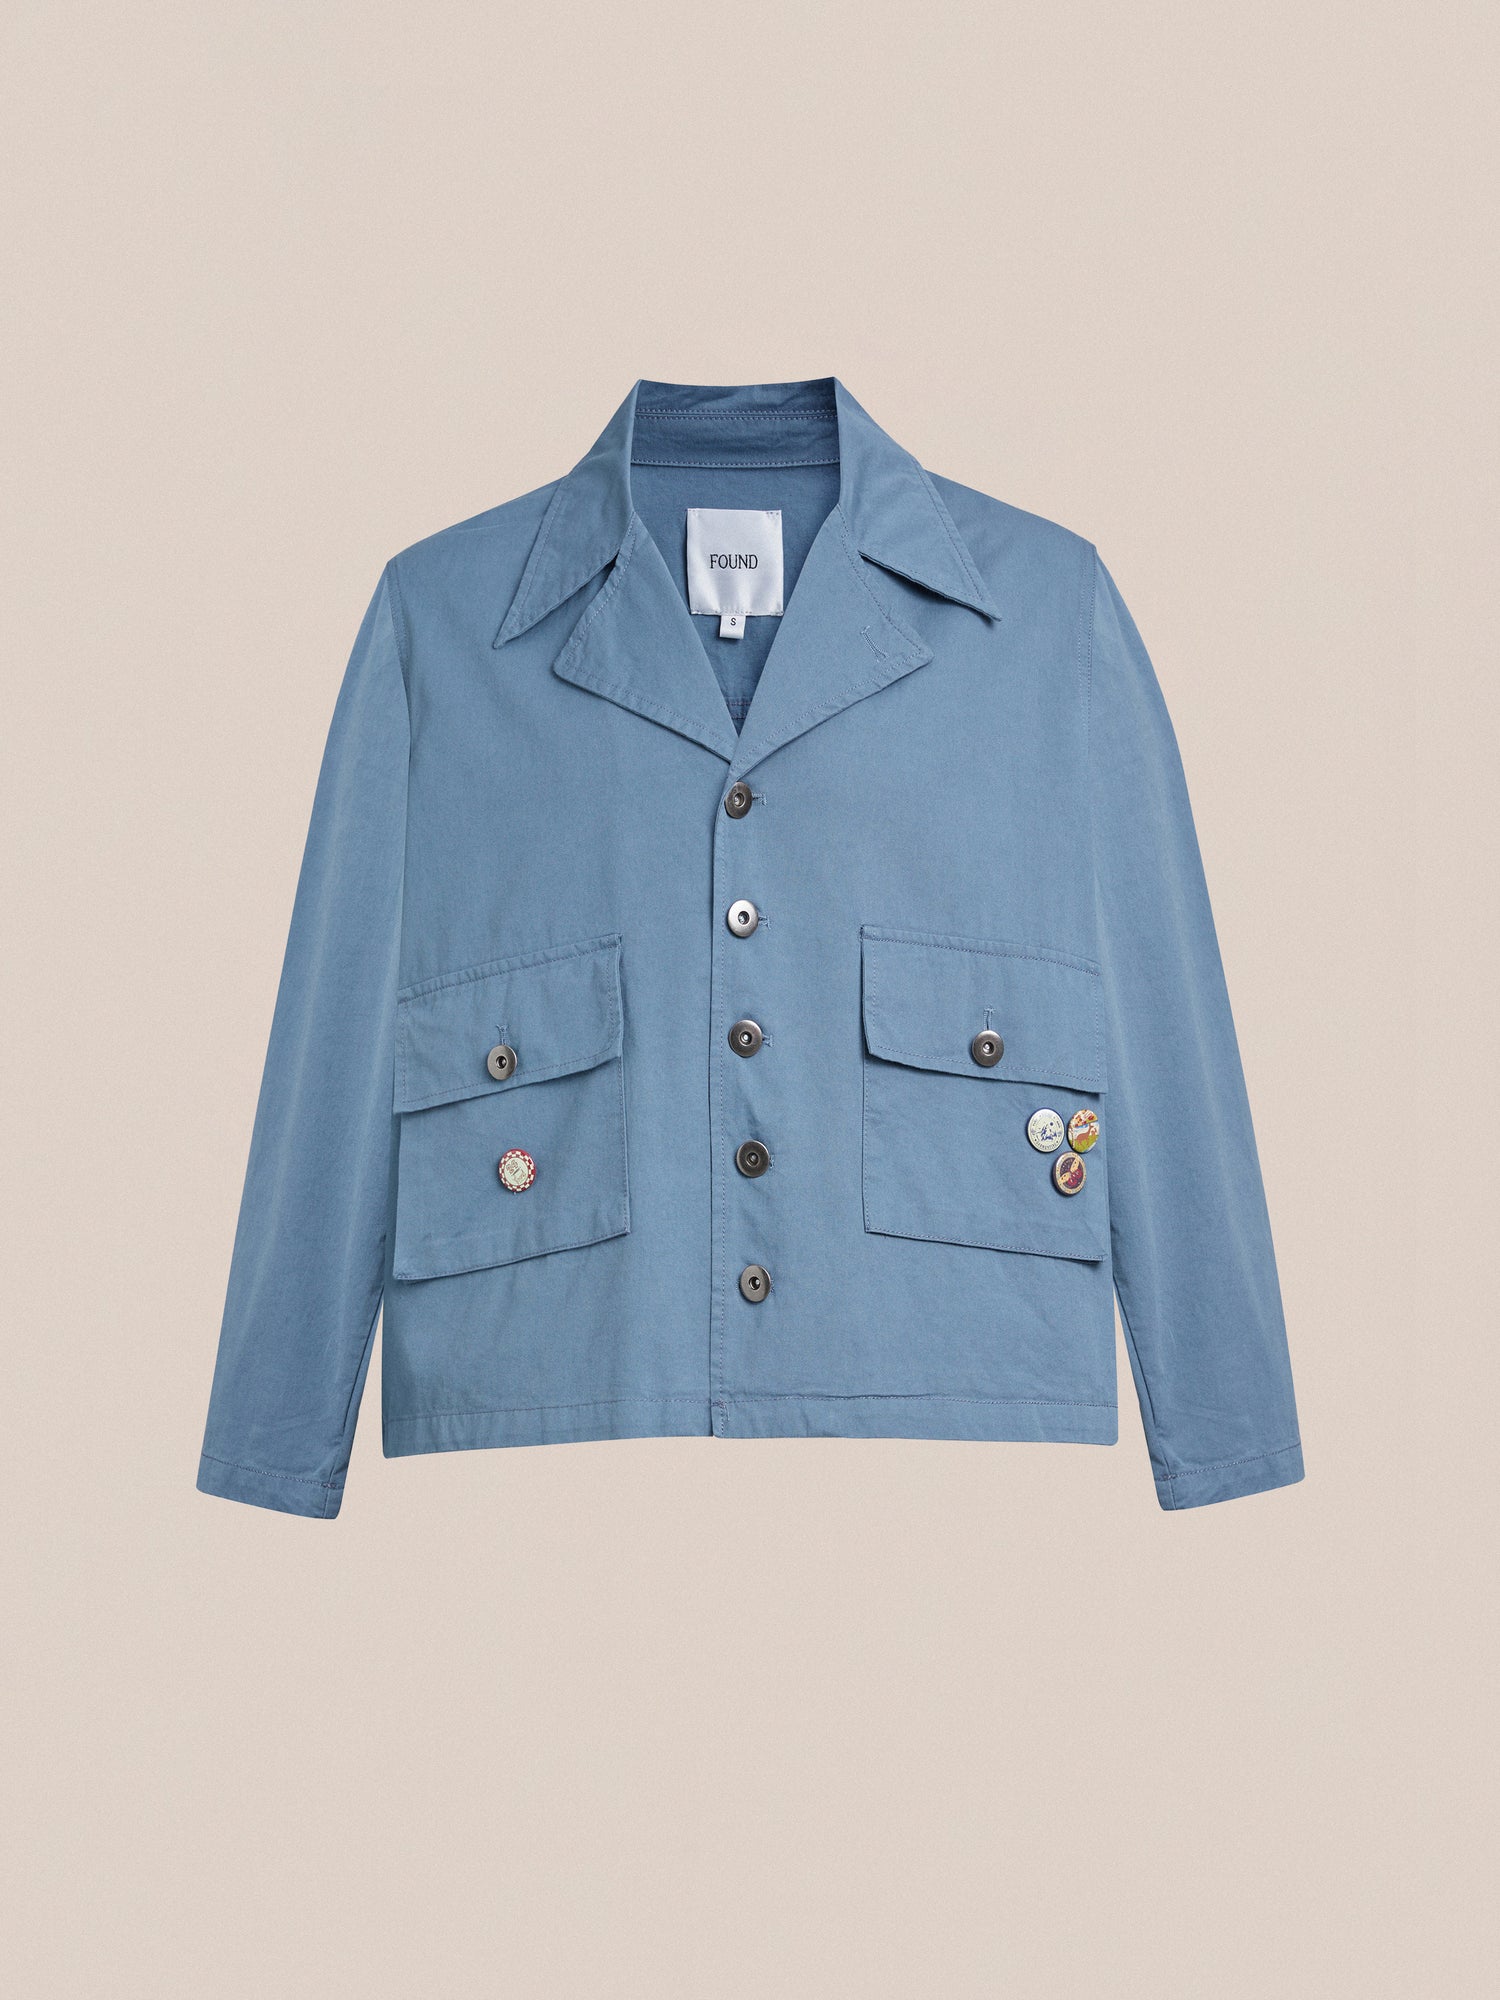 A vintage workwear-inspired Patina Work Jacket with durable buttons on the front by Found.